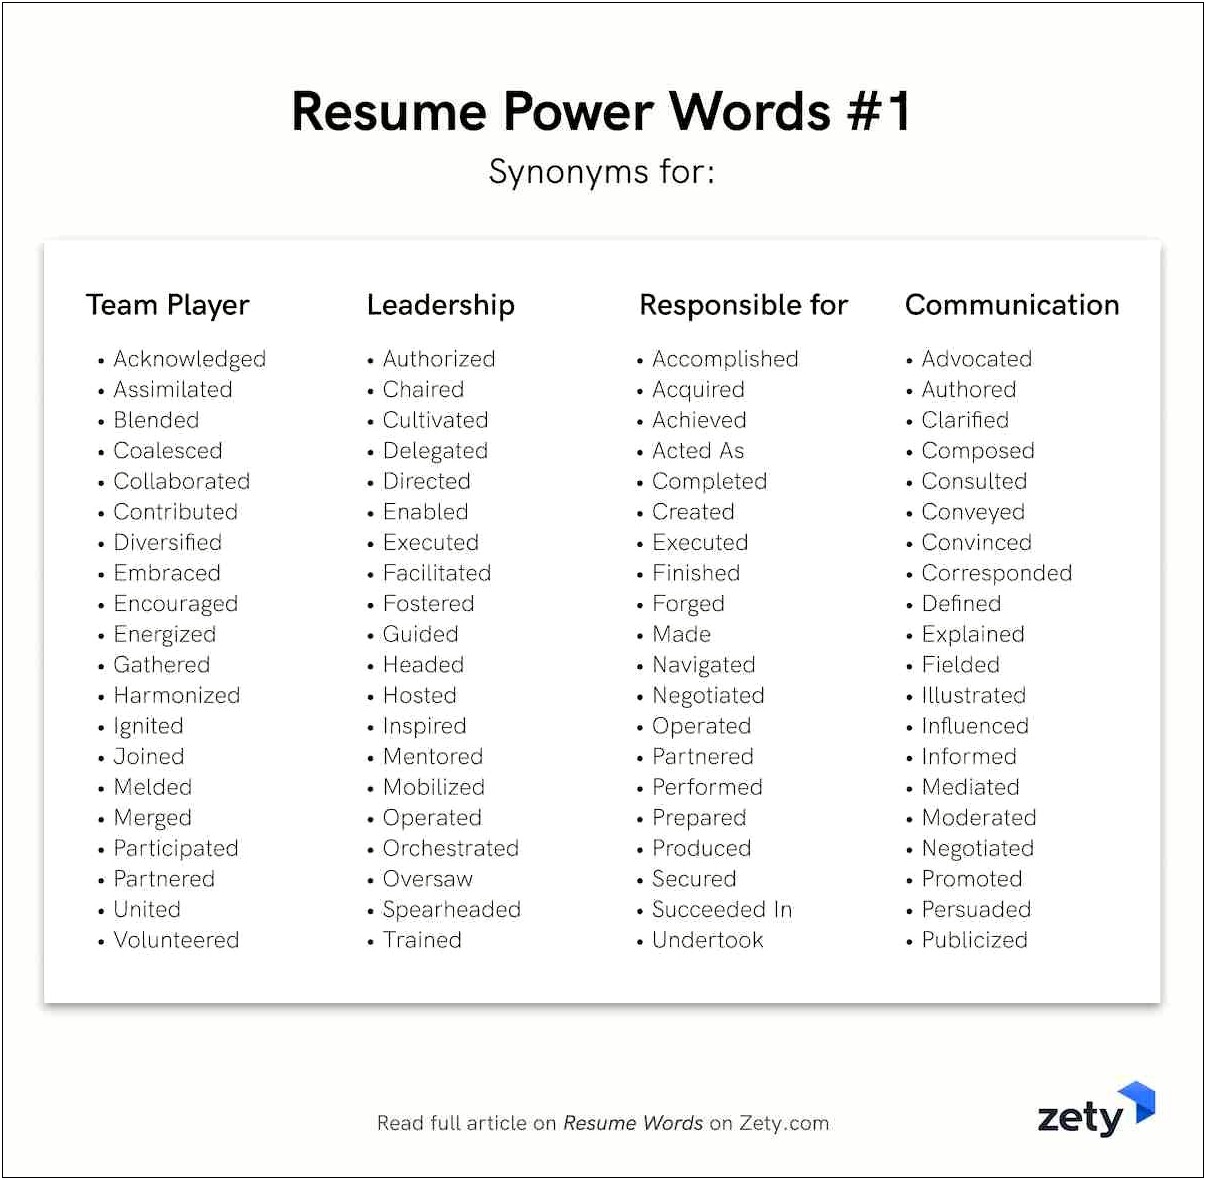 Key Words And Phrases For A Resume